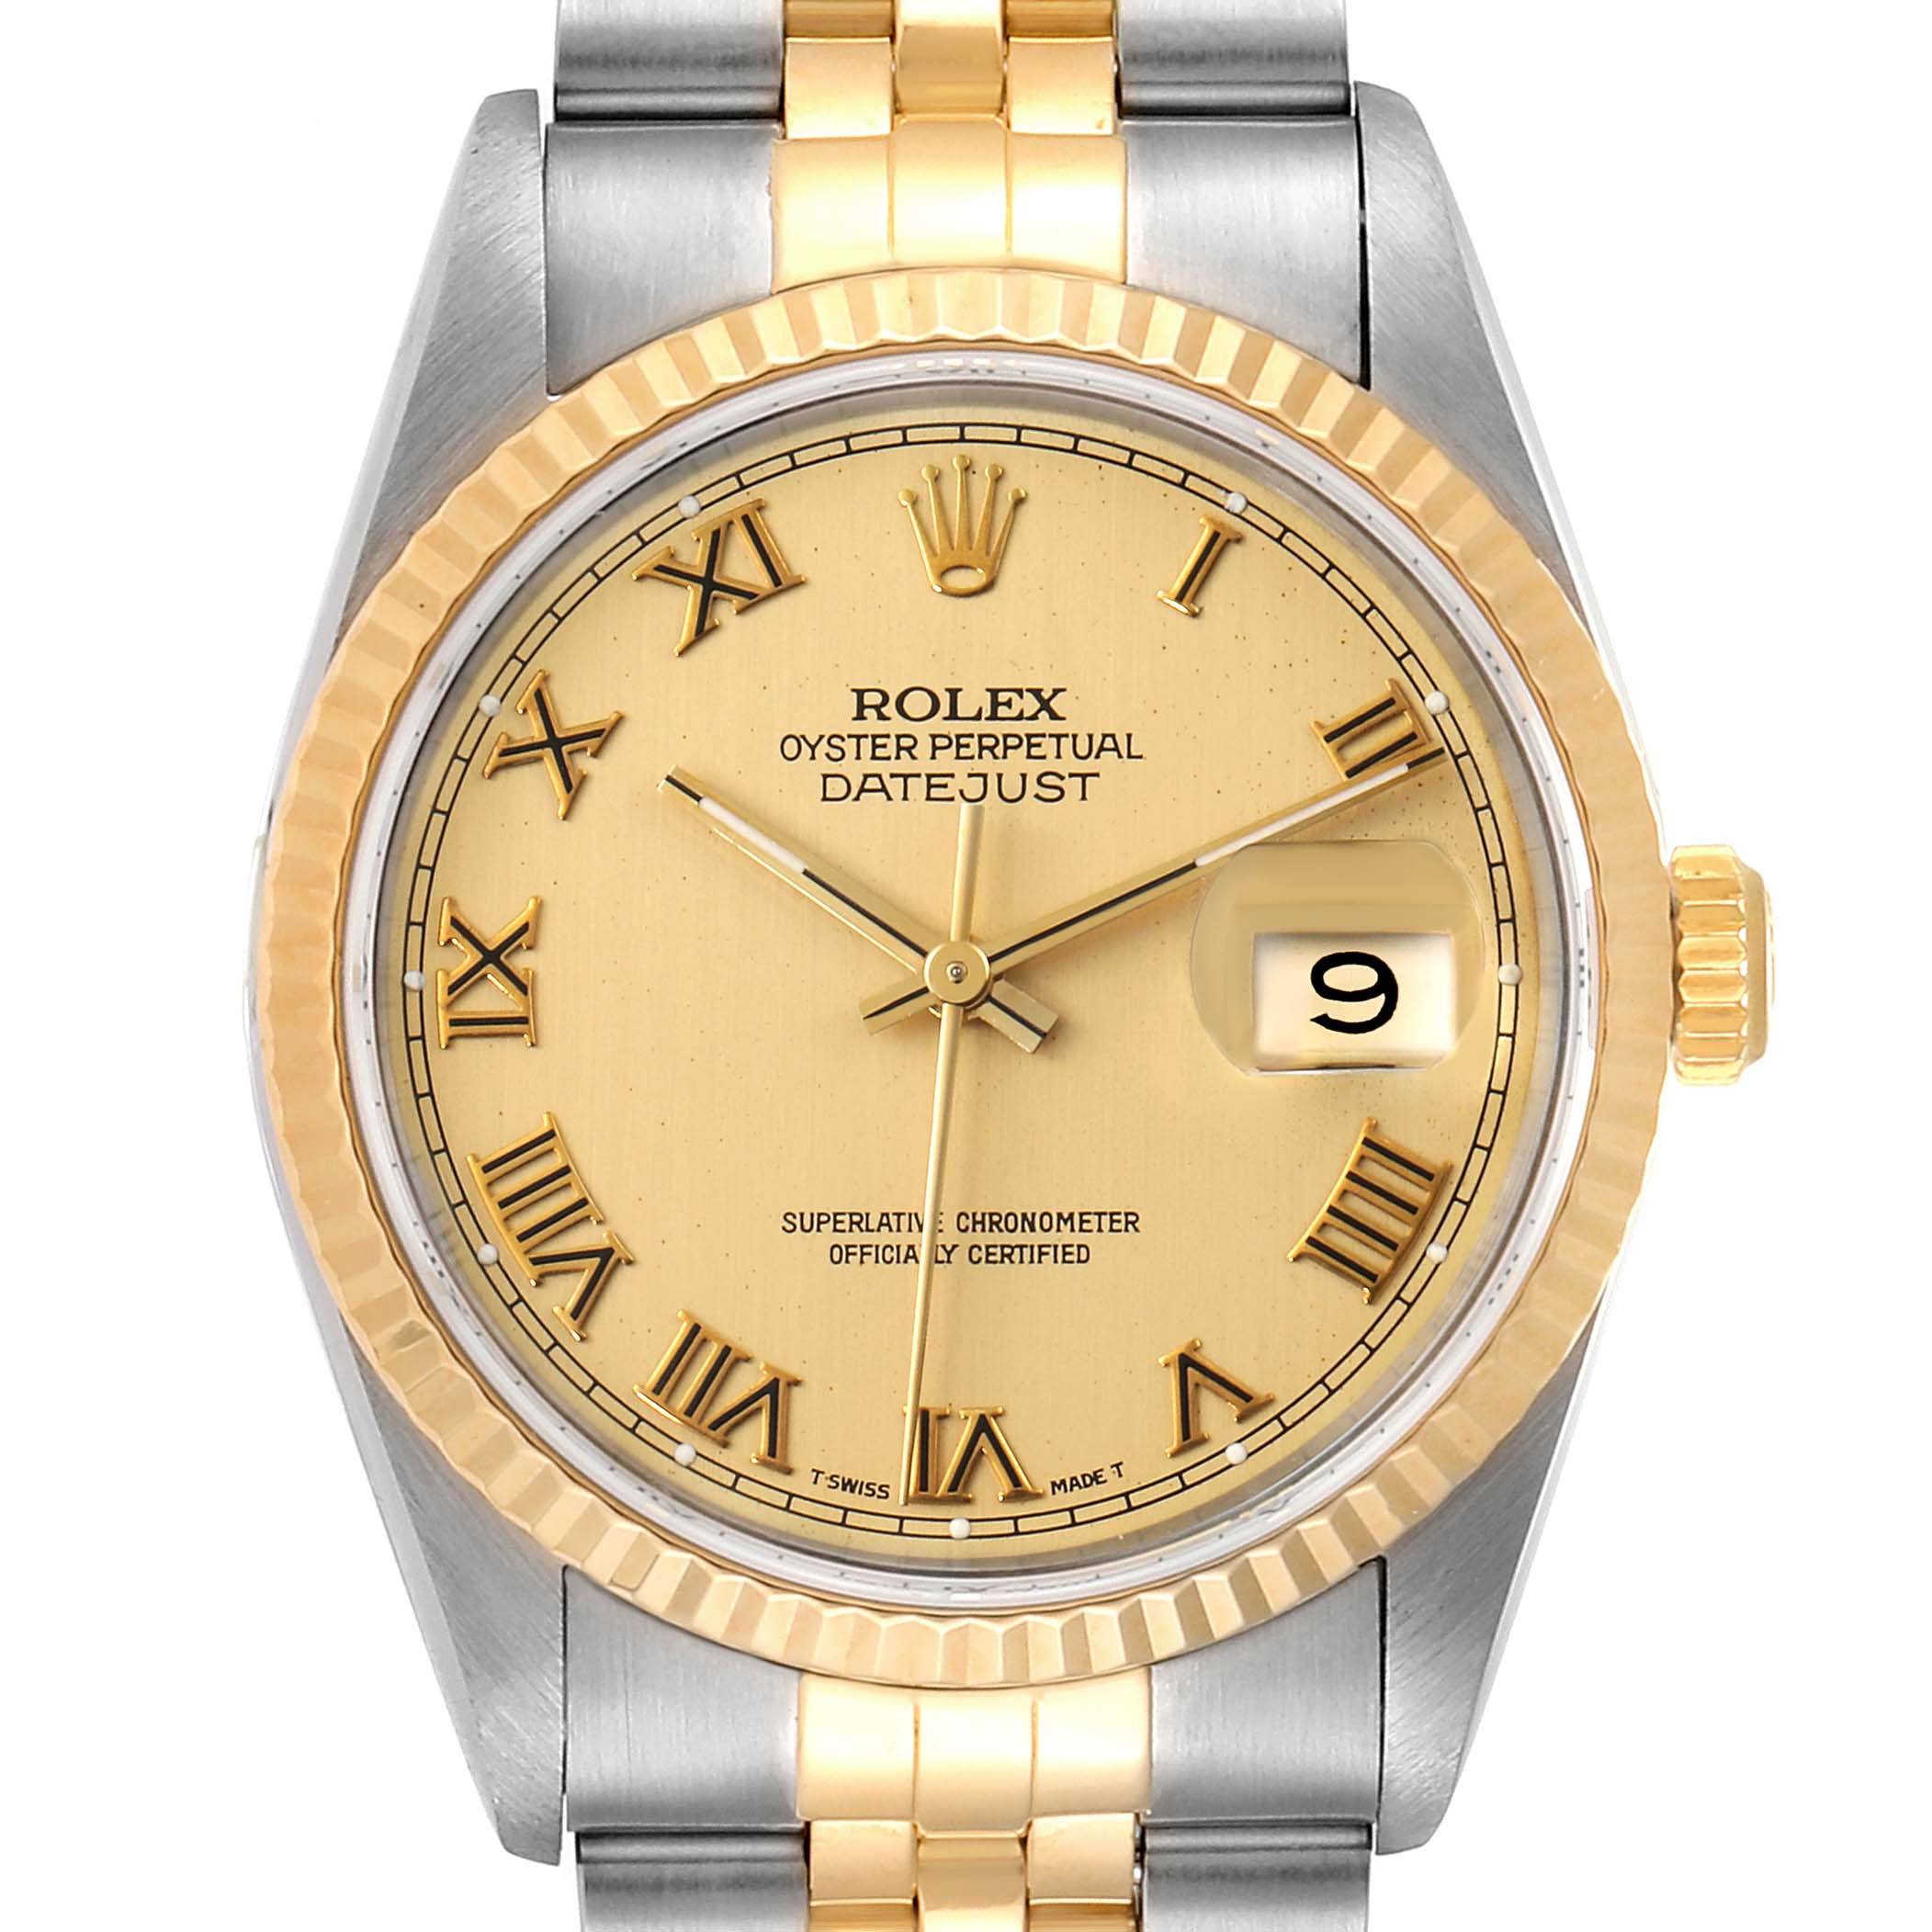 Rolex Datejust 2-Tone Yellow Gold/Steel 36mm Cream Pyramid Dial with Roman Numerals